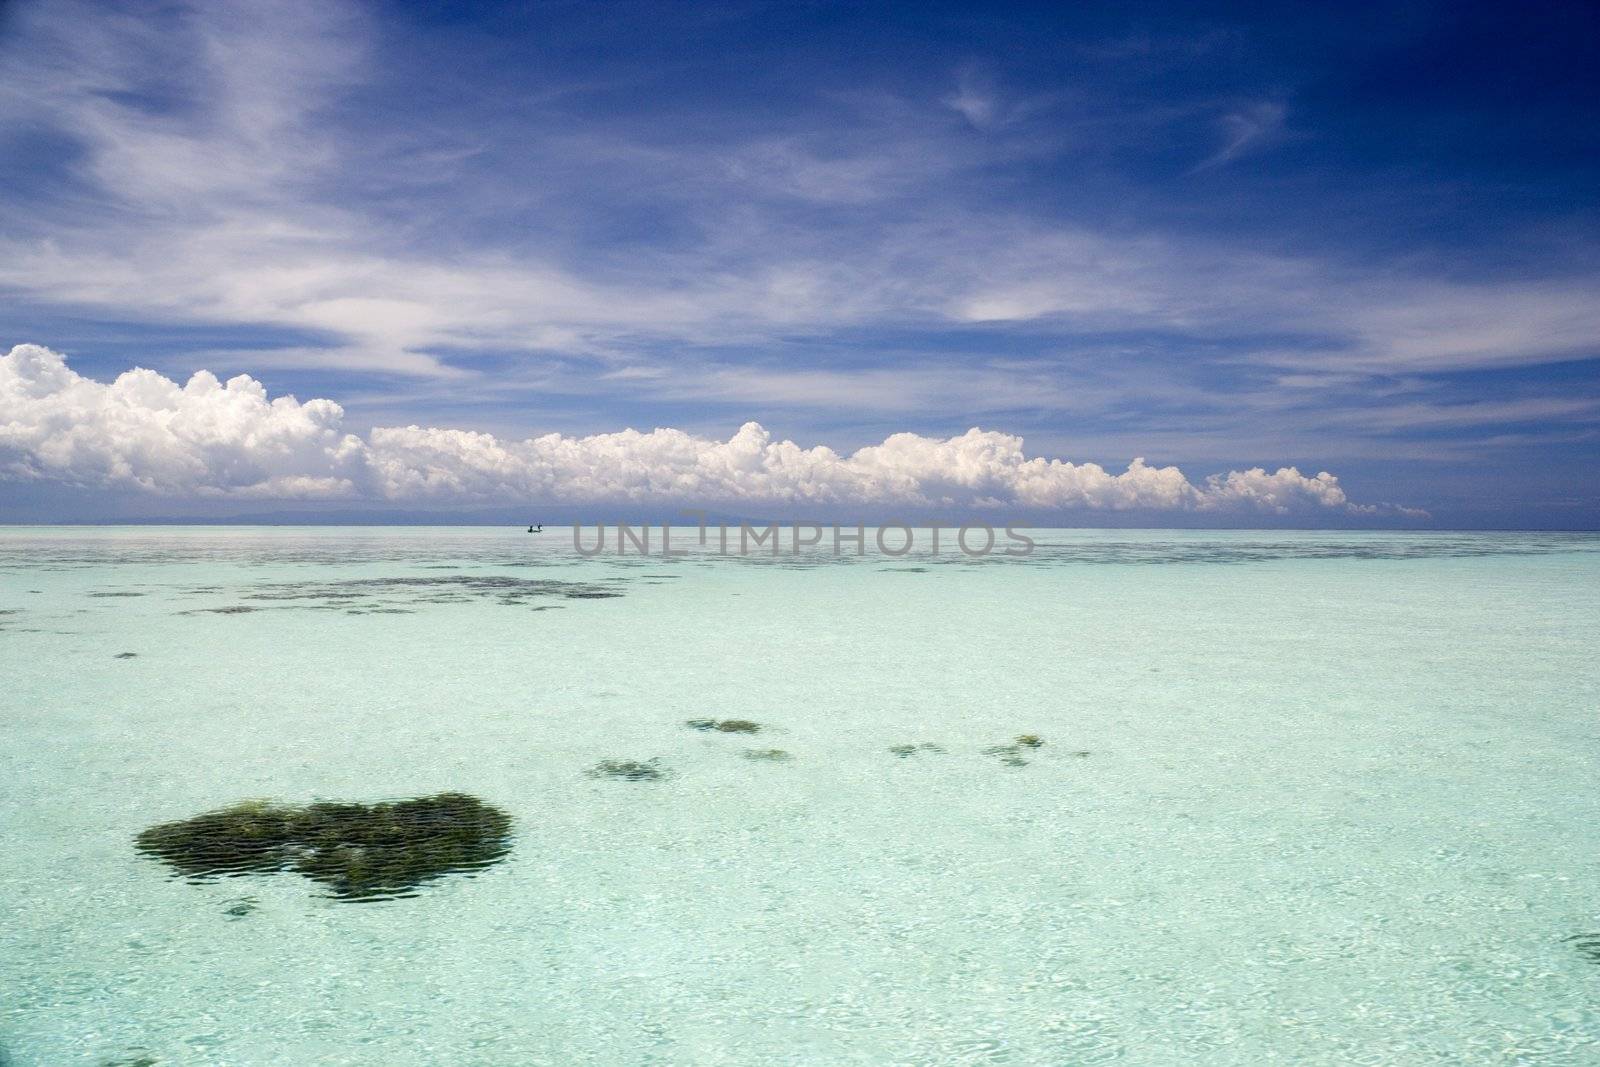 Image of the shallow open sea in Malaysian waters.